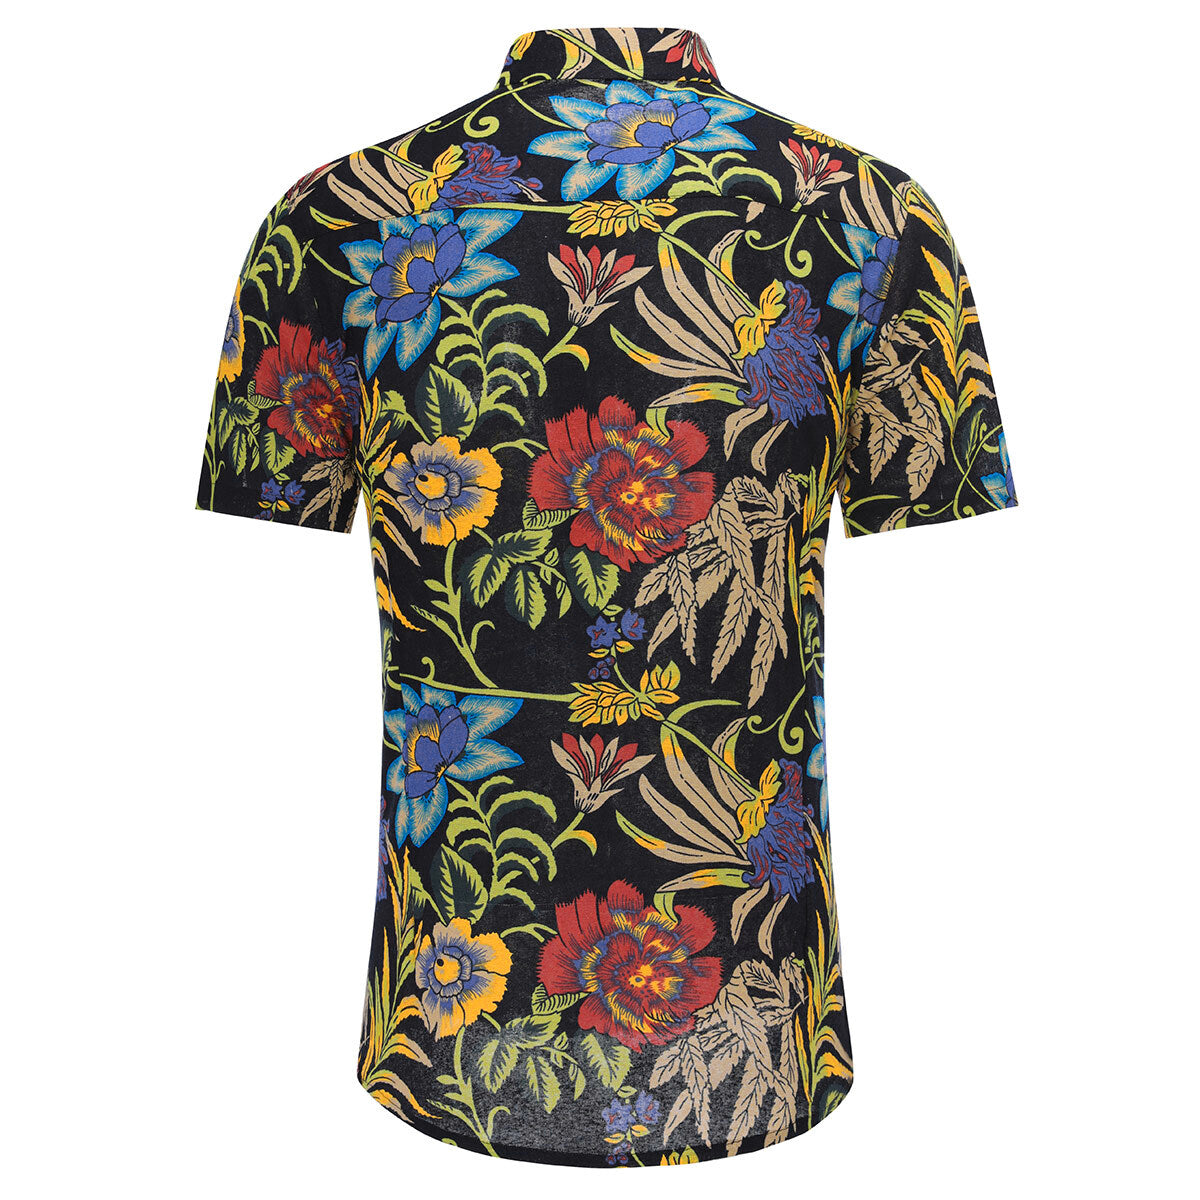 Tropical Floral Print Hawaiian Style 2-Piece Summer Suit